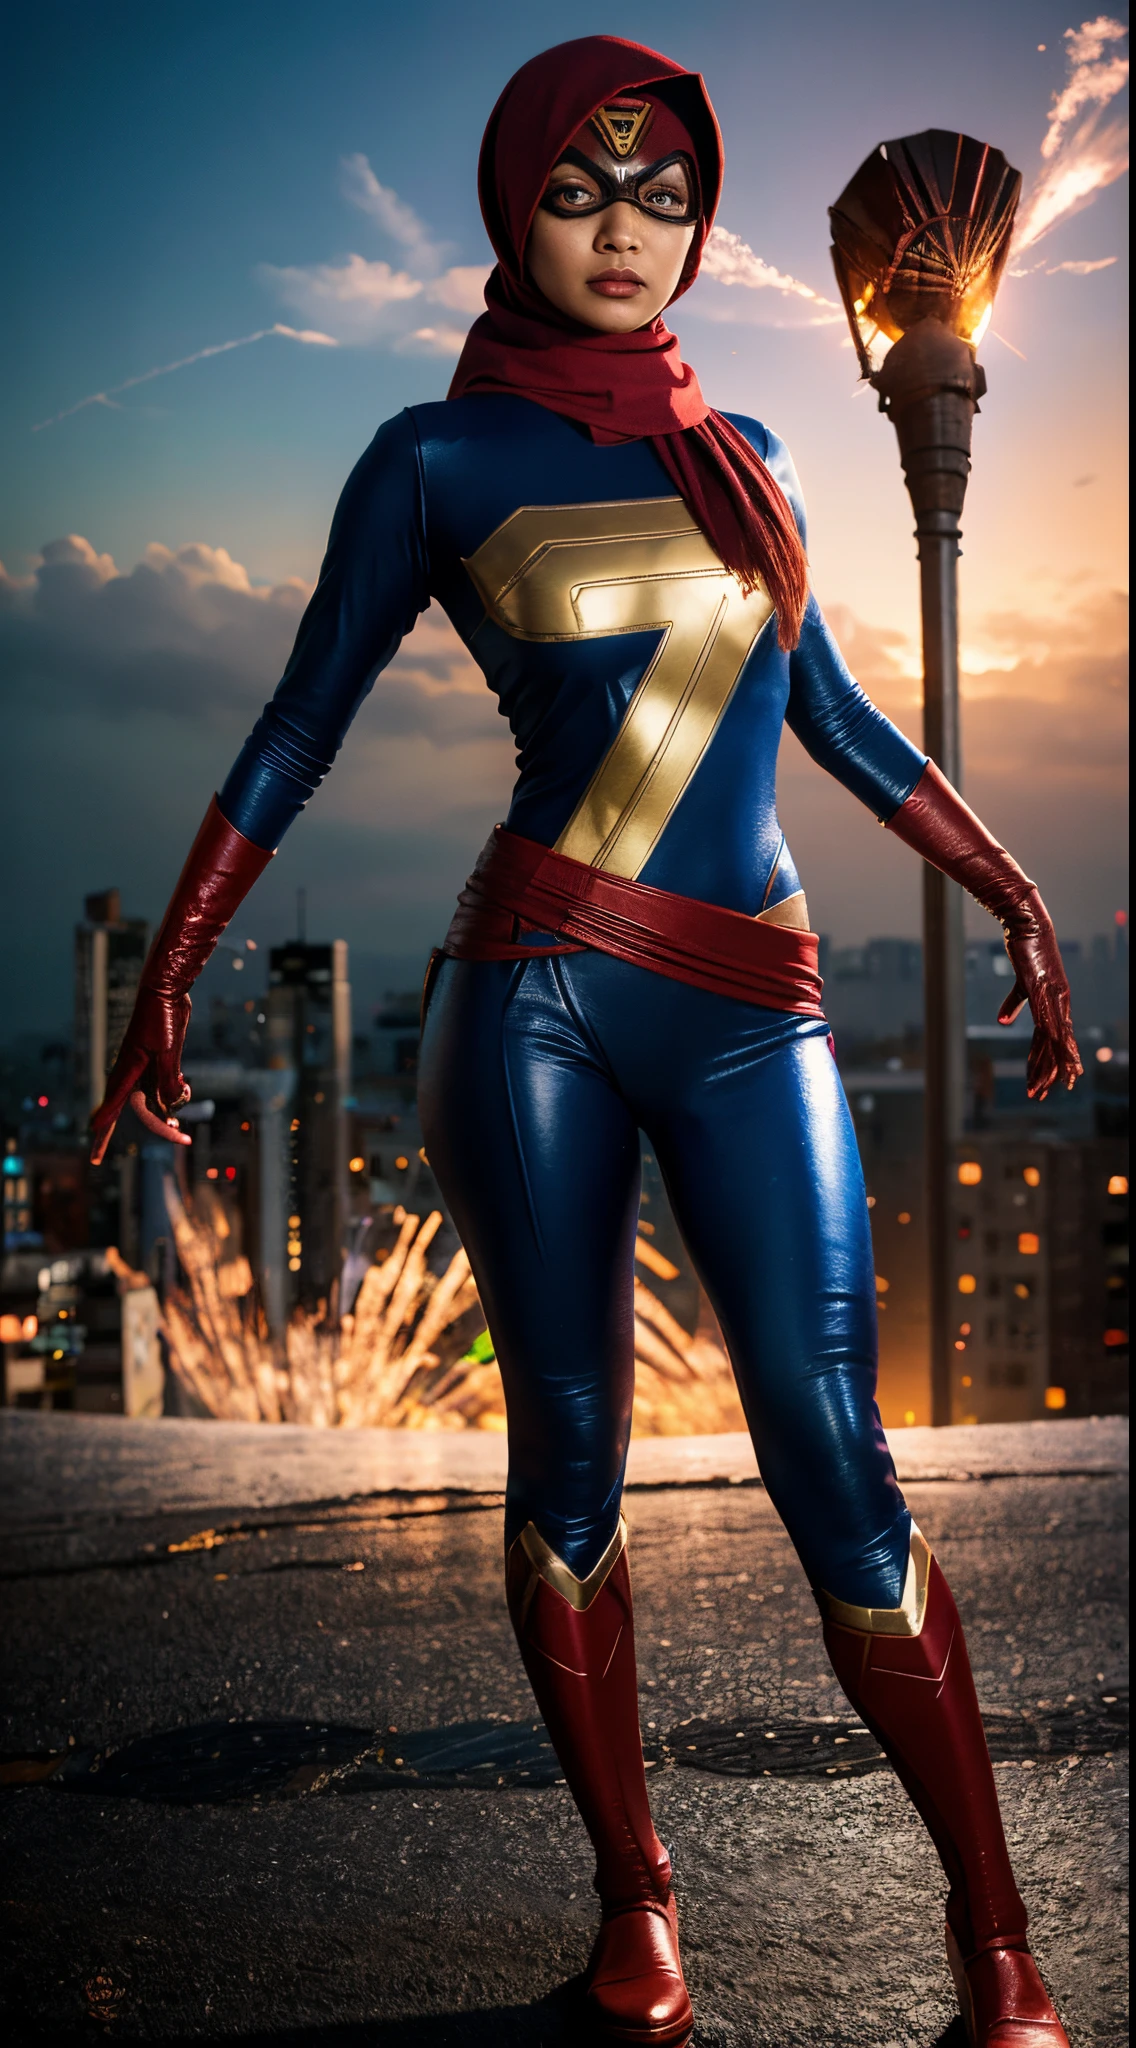 Create a dynamic and action-packed photomanipulation reminiscent of Marvel superhero movies. Feature the Malay girl in hijab showcasing her unique superpowers in a cityscape, surrounded by vivid colors and high-energy effects